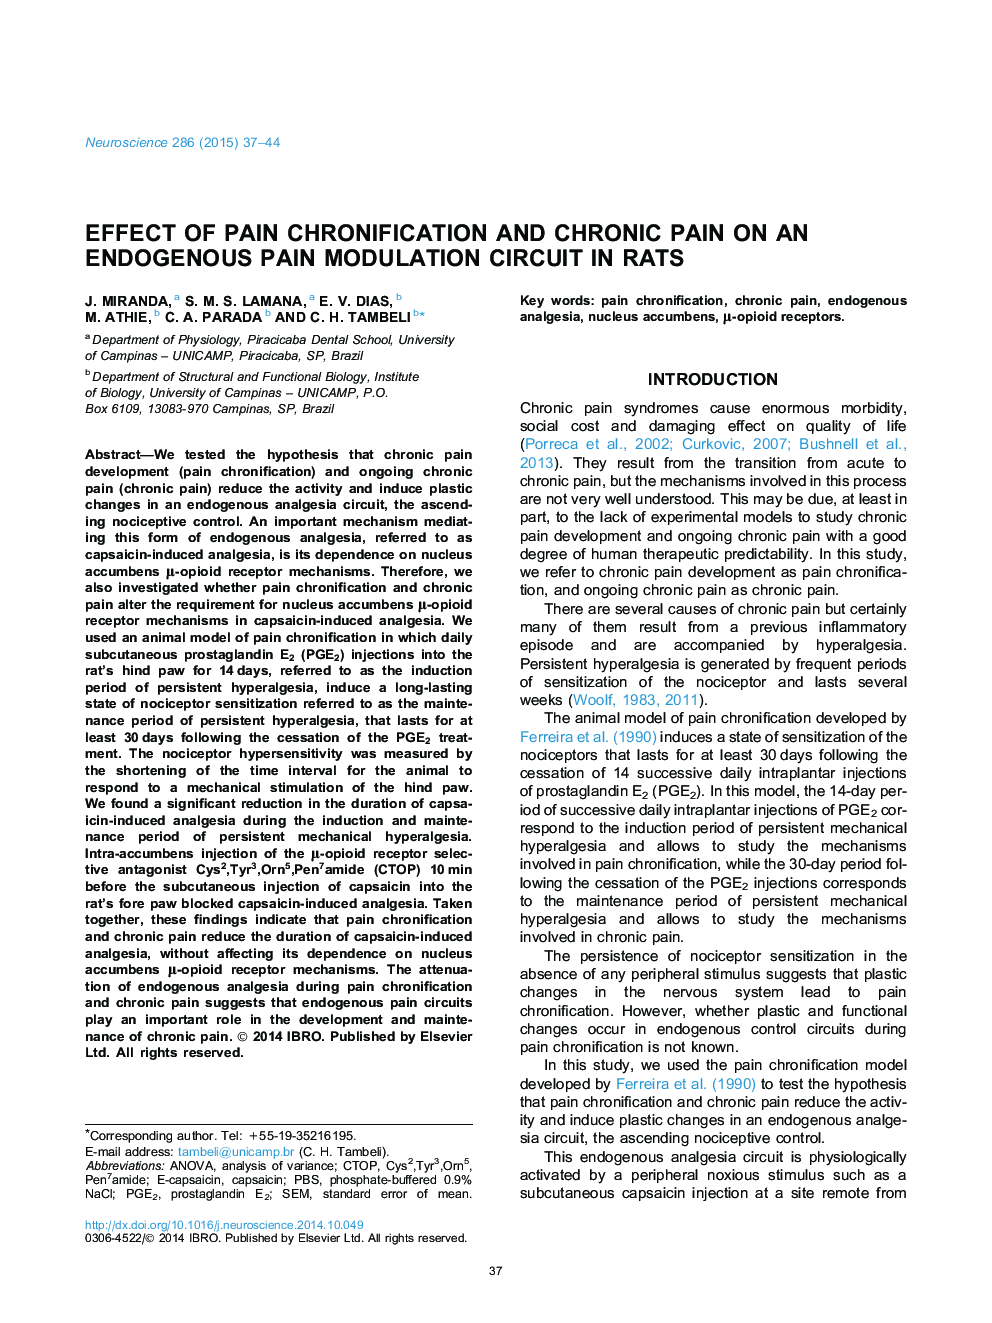 Effect of pain chronification and chronic pain on an endogenous pain modulation circuit in rats